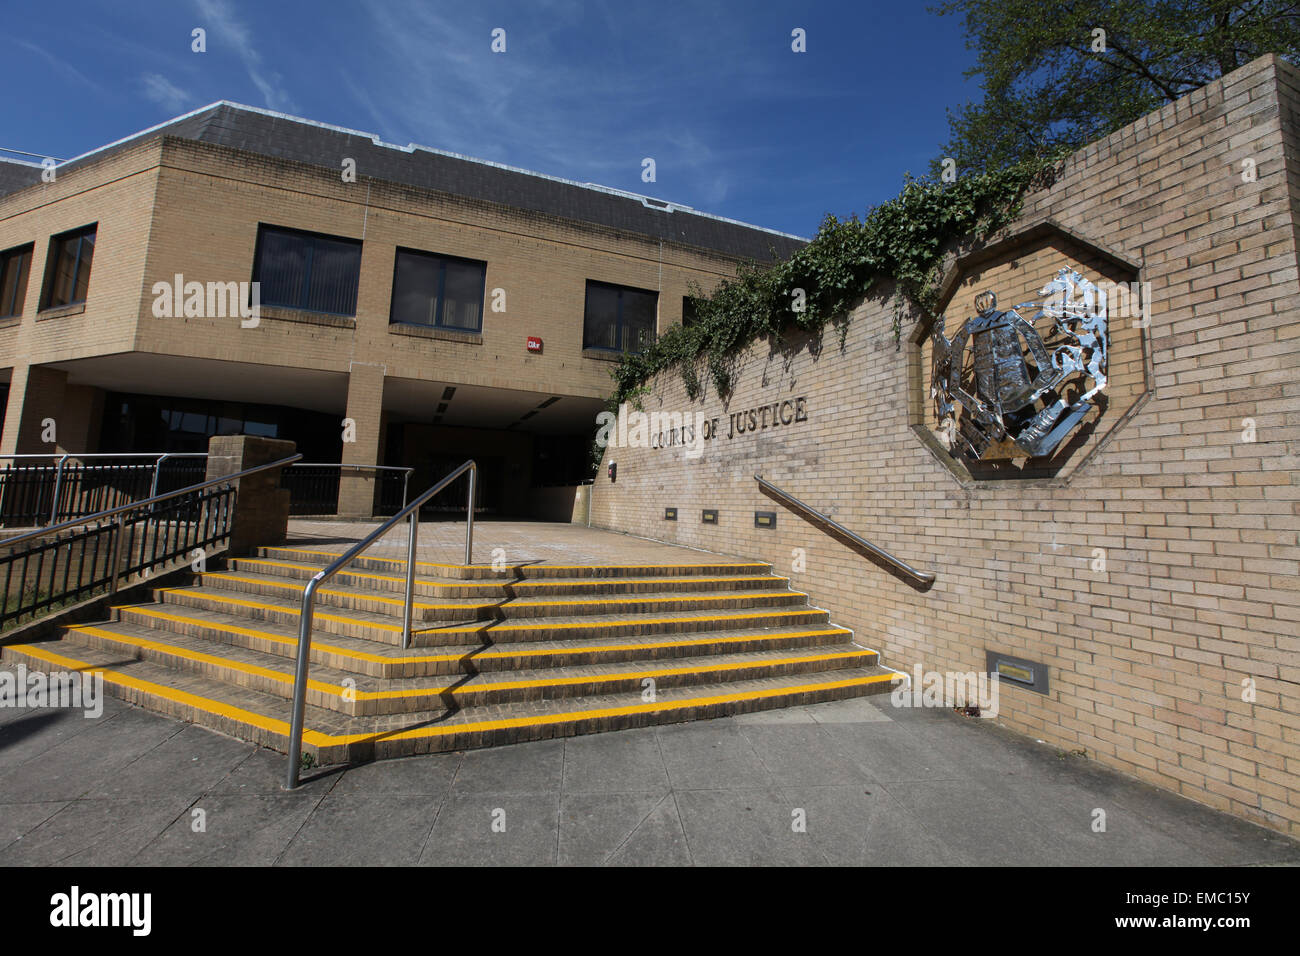 Southampton Court High Resolution Stock Photography and Images Alamy